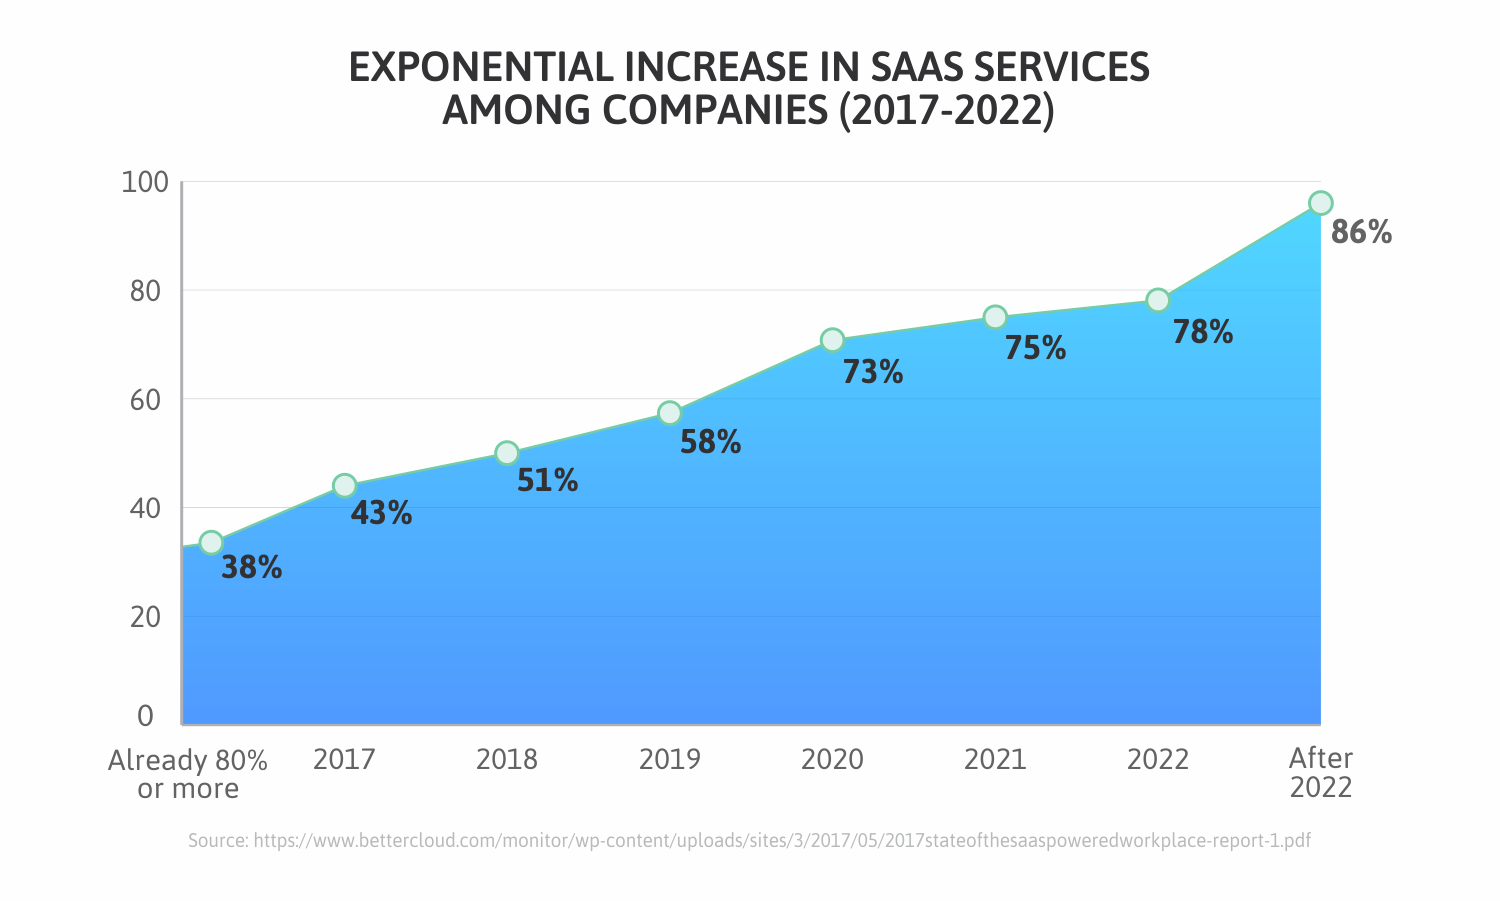 Increase-in-SaaS-services-2017-2022